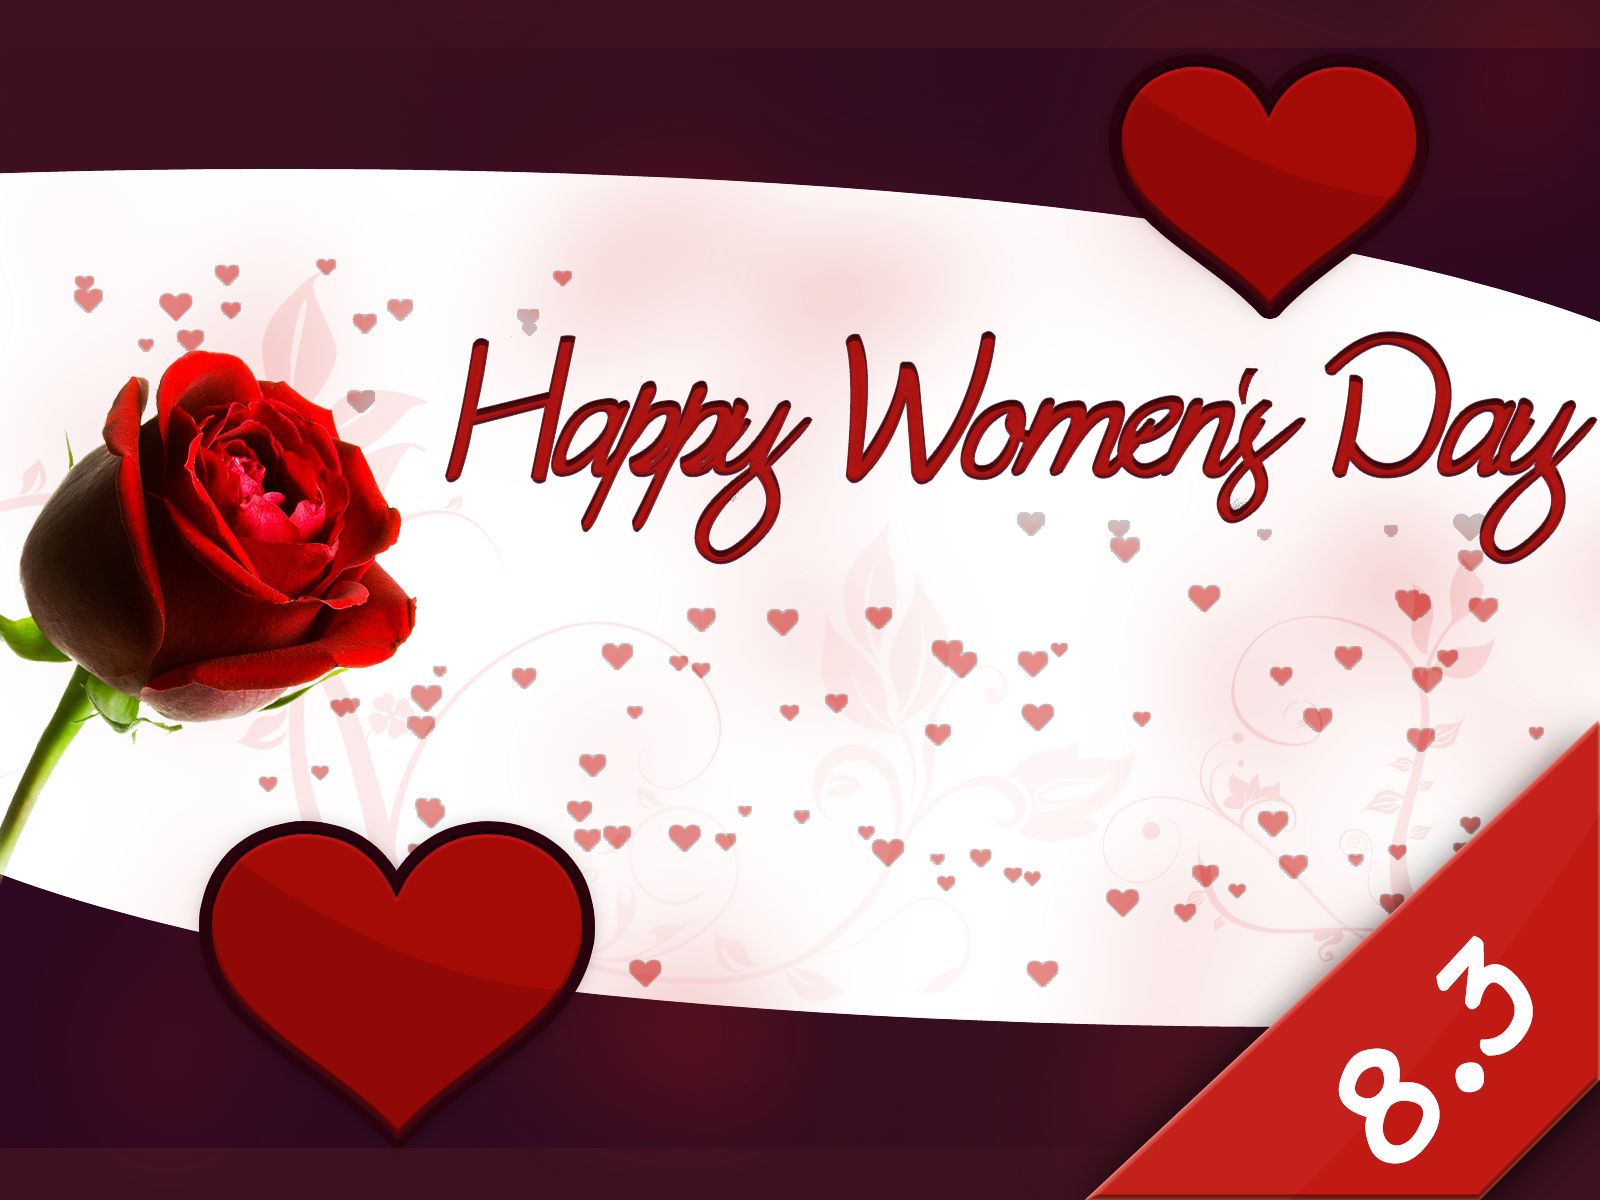 holiday, women's day, flower, happy women's day, heart, rose, statement